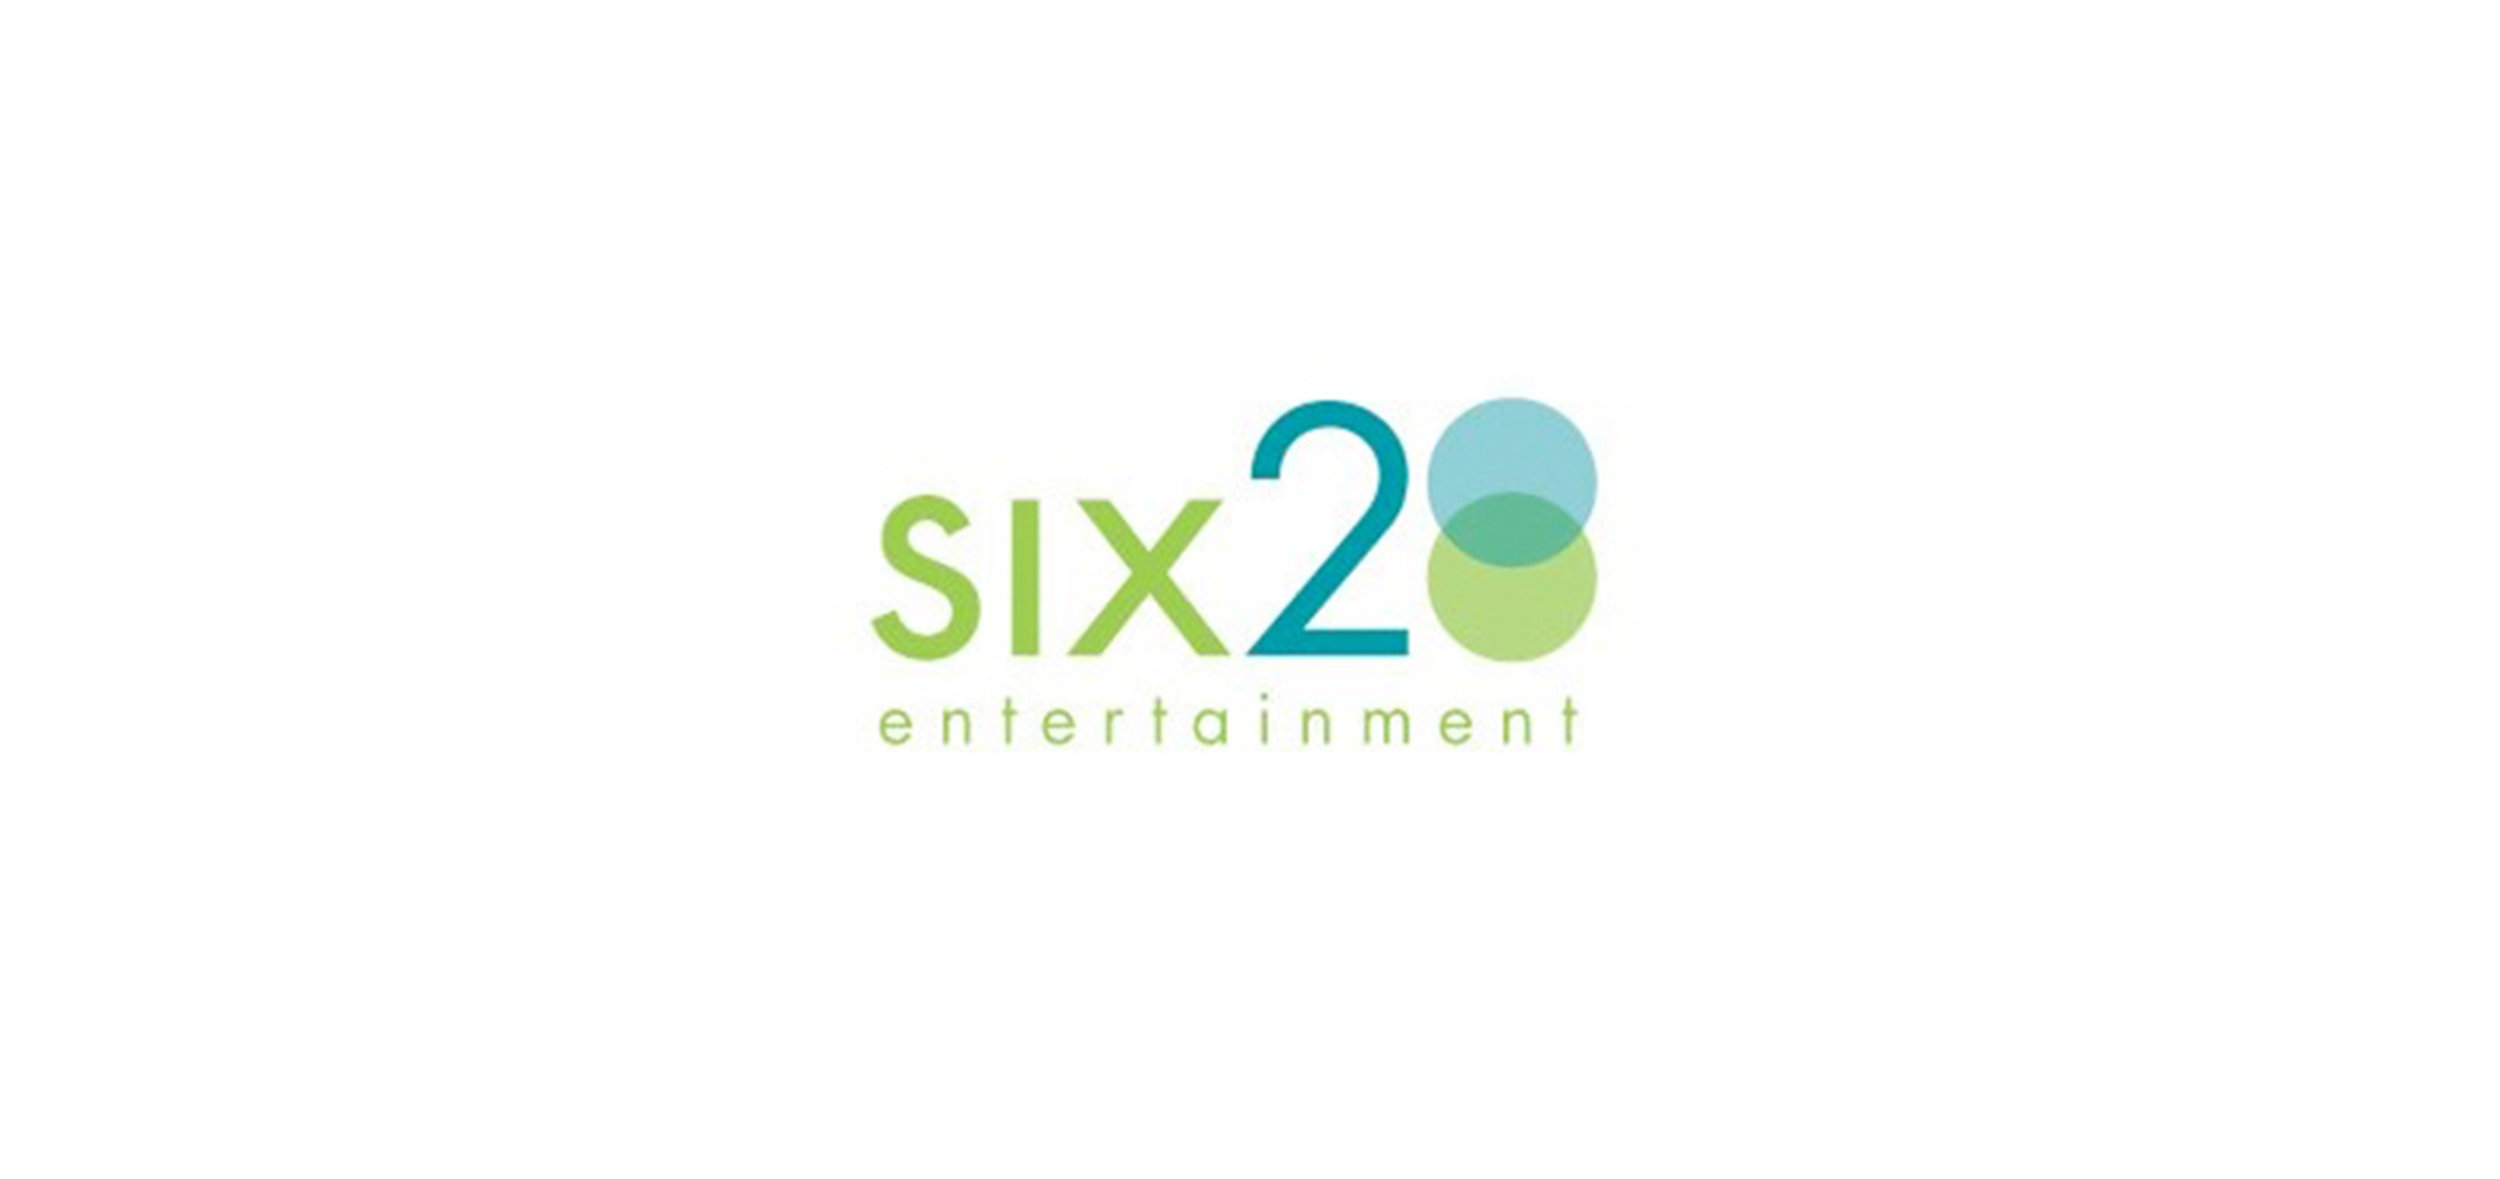 mysisterfred-six28entertainment-logo.png